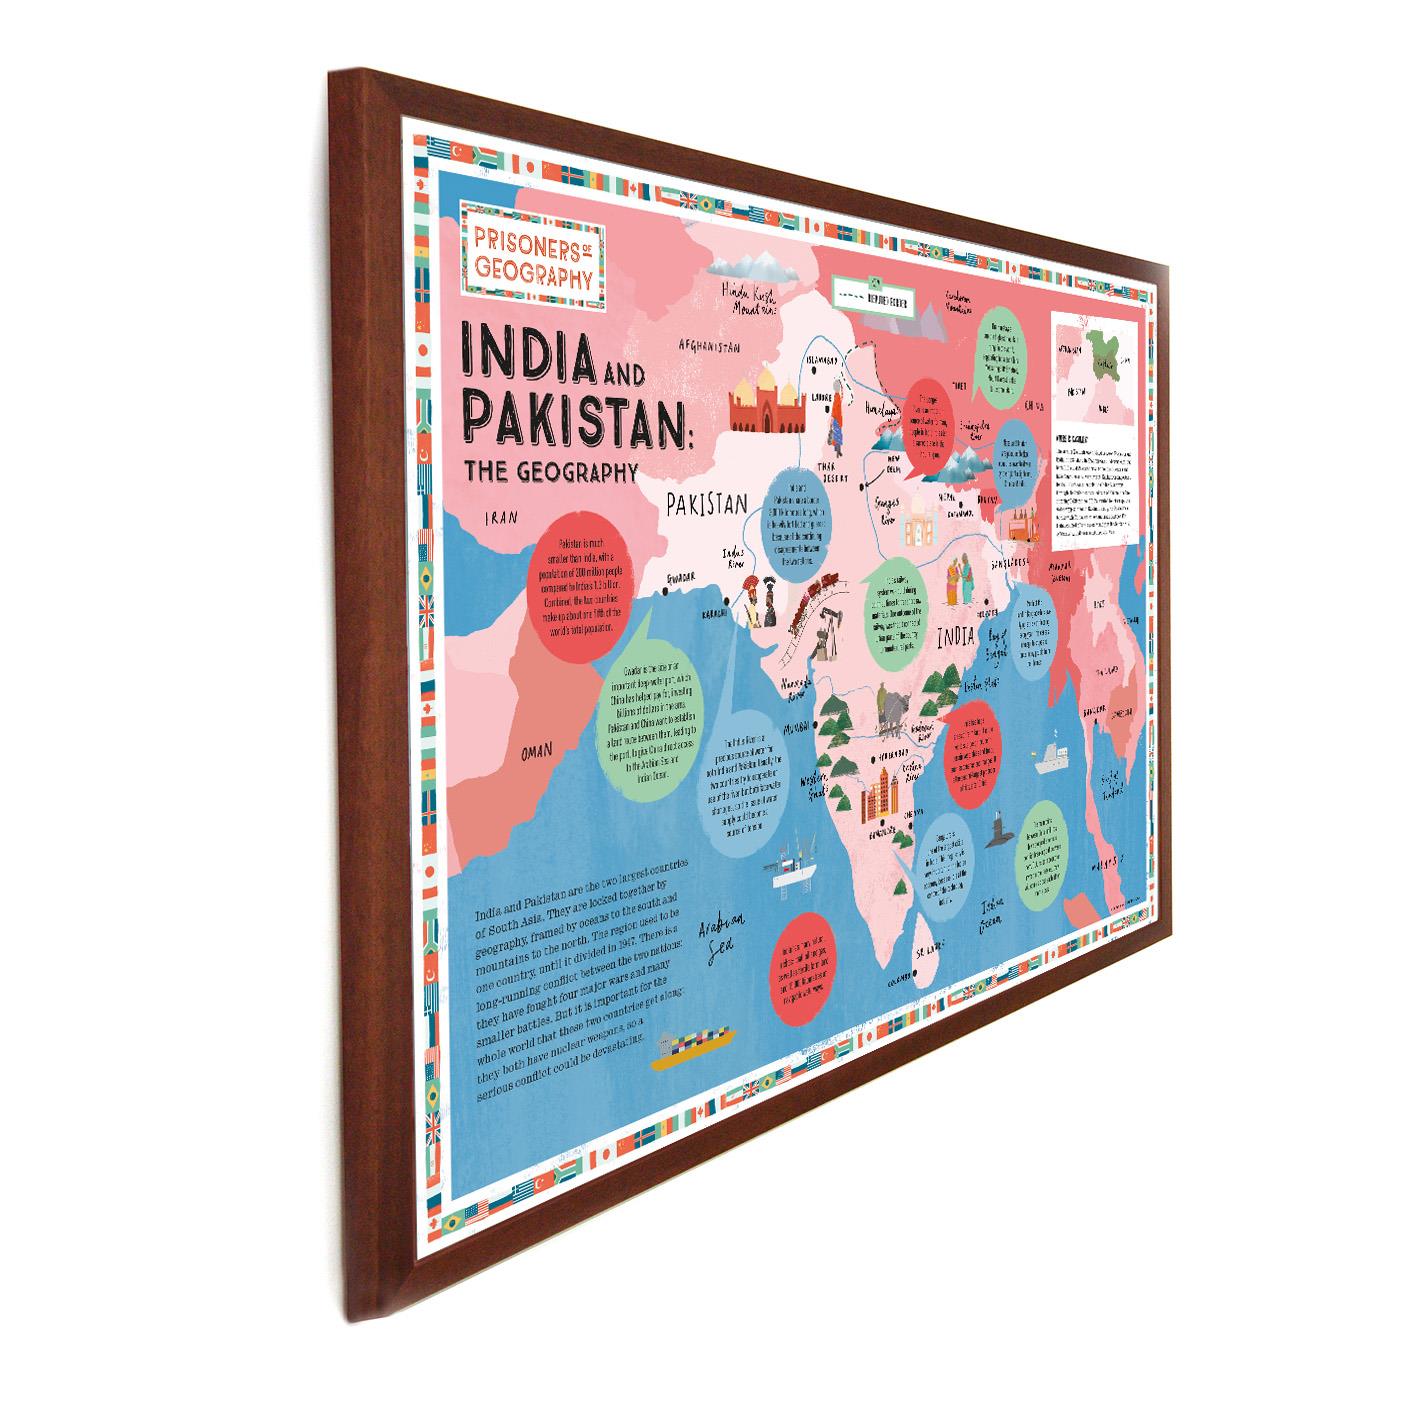 India and Pakistan Educational Wall Map - Prisoners of Geography